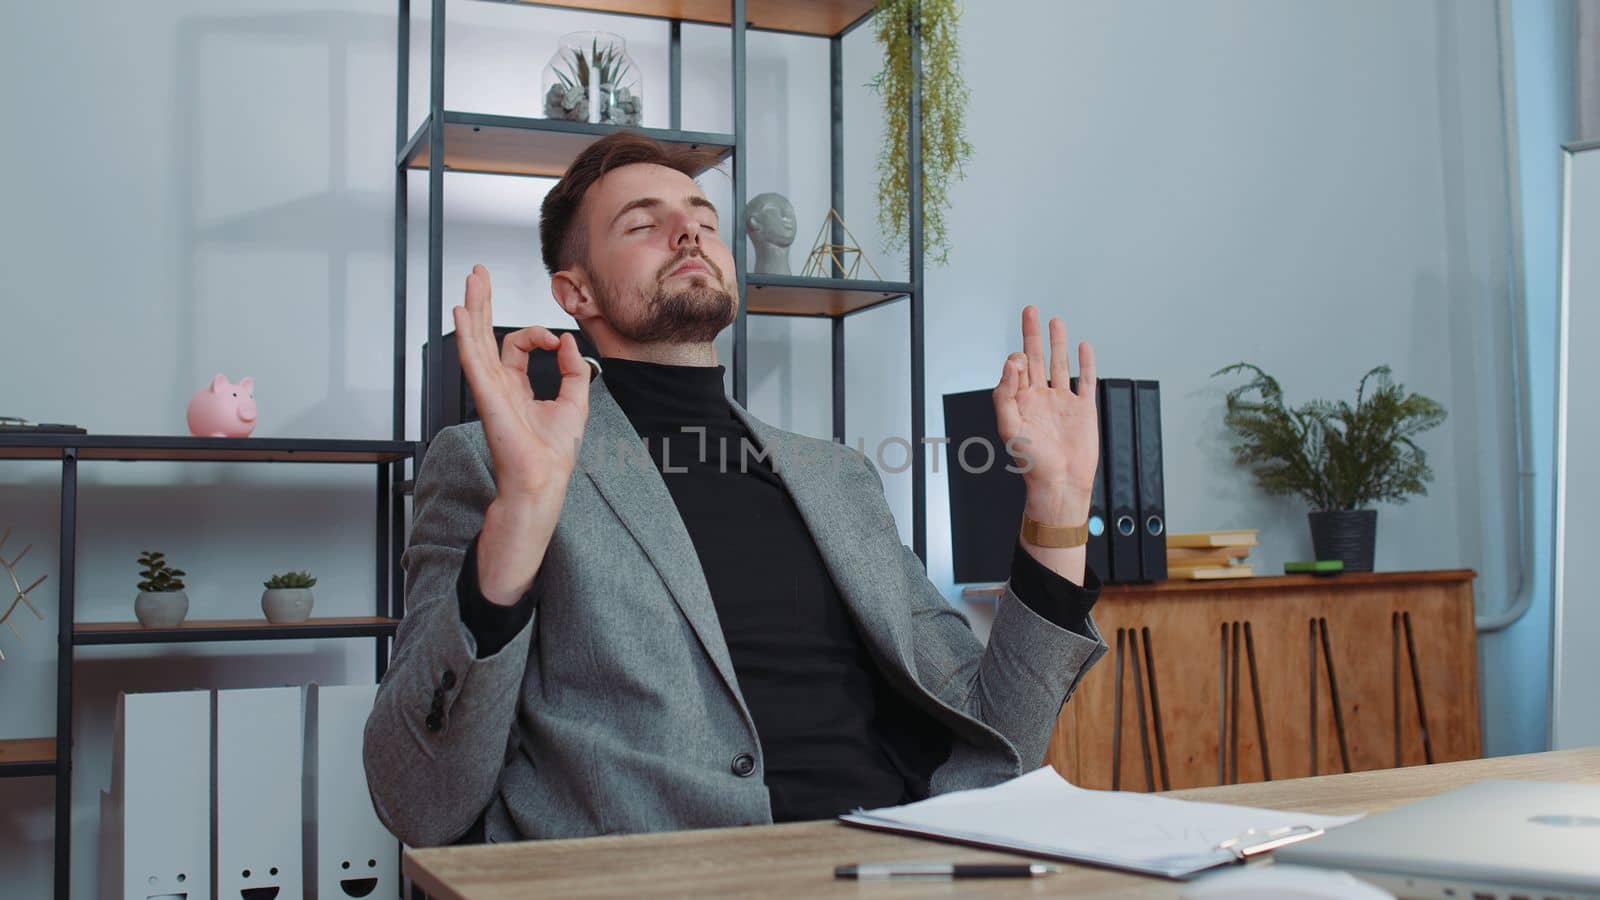 Businessman in suit working on laptop computer, meditating, doing yoga breathing exercise in lotus position at home office desk. Calm serene freelancer man taking break. Busy occupation. Peace of mind